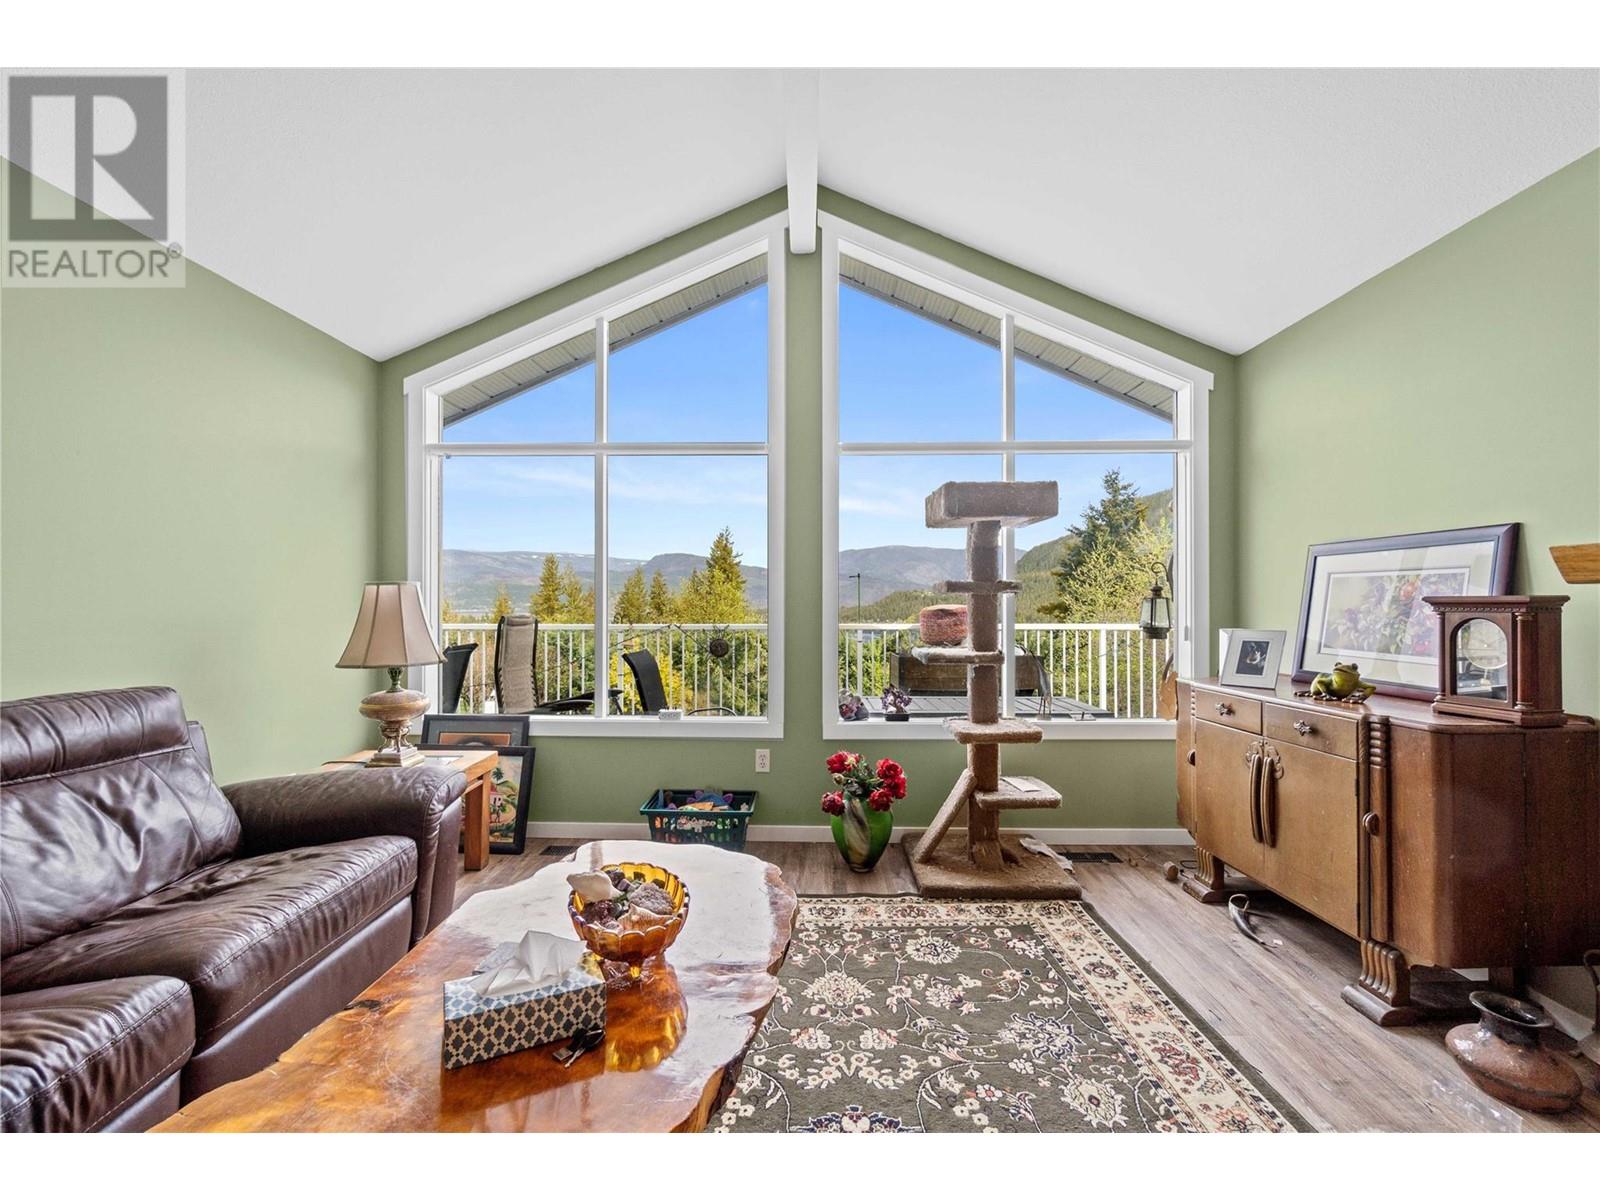 2657 Mountview Place Blind Bay